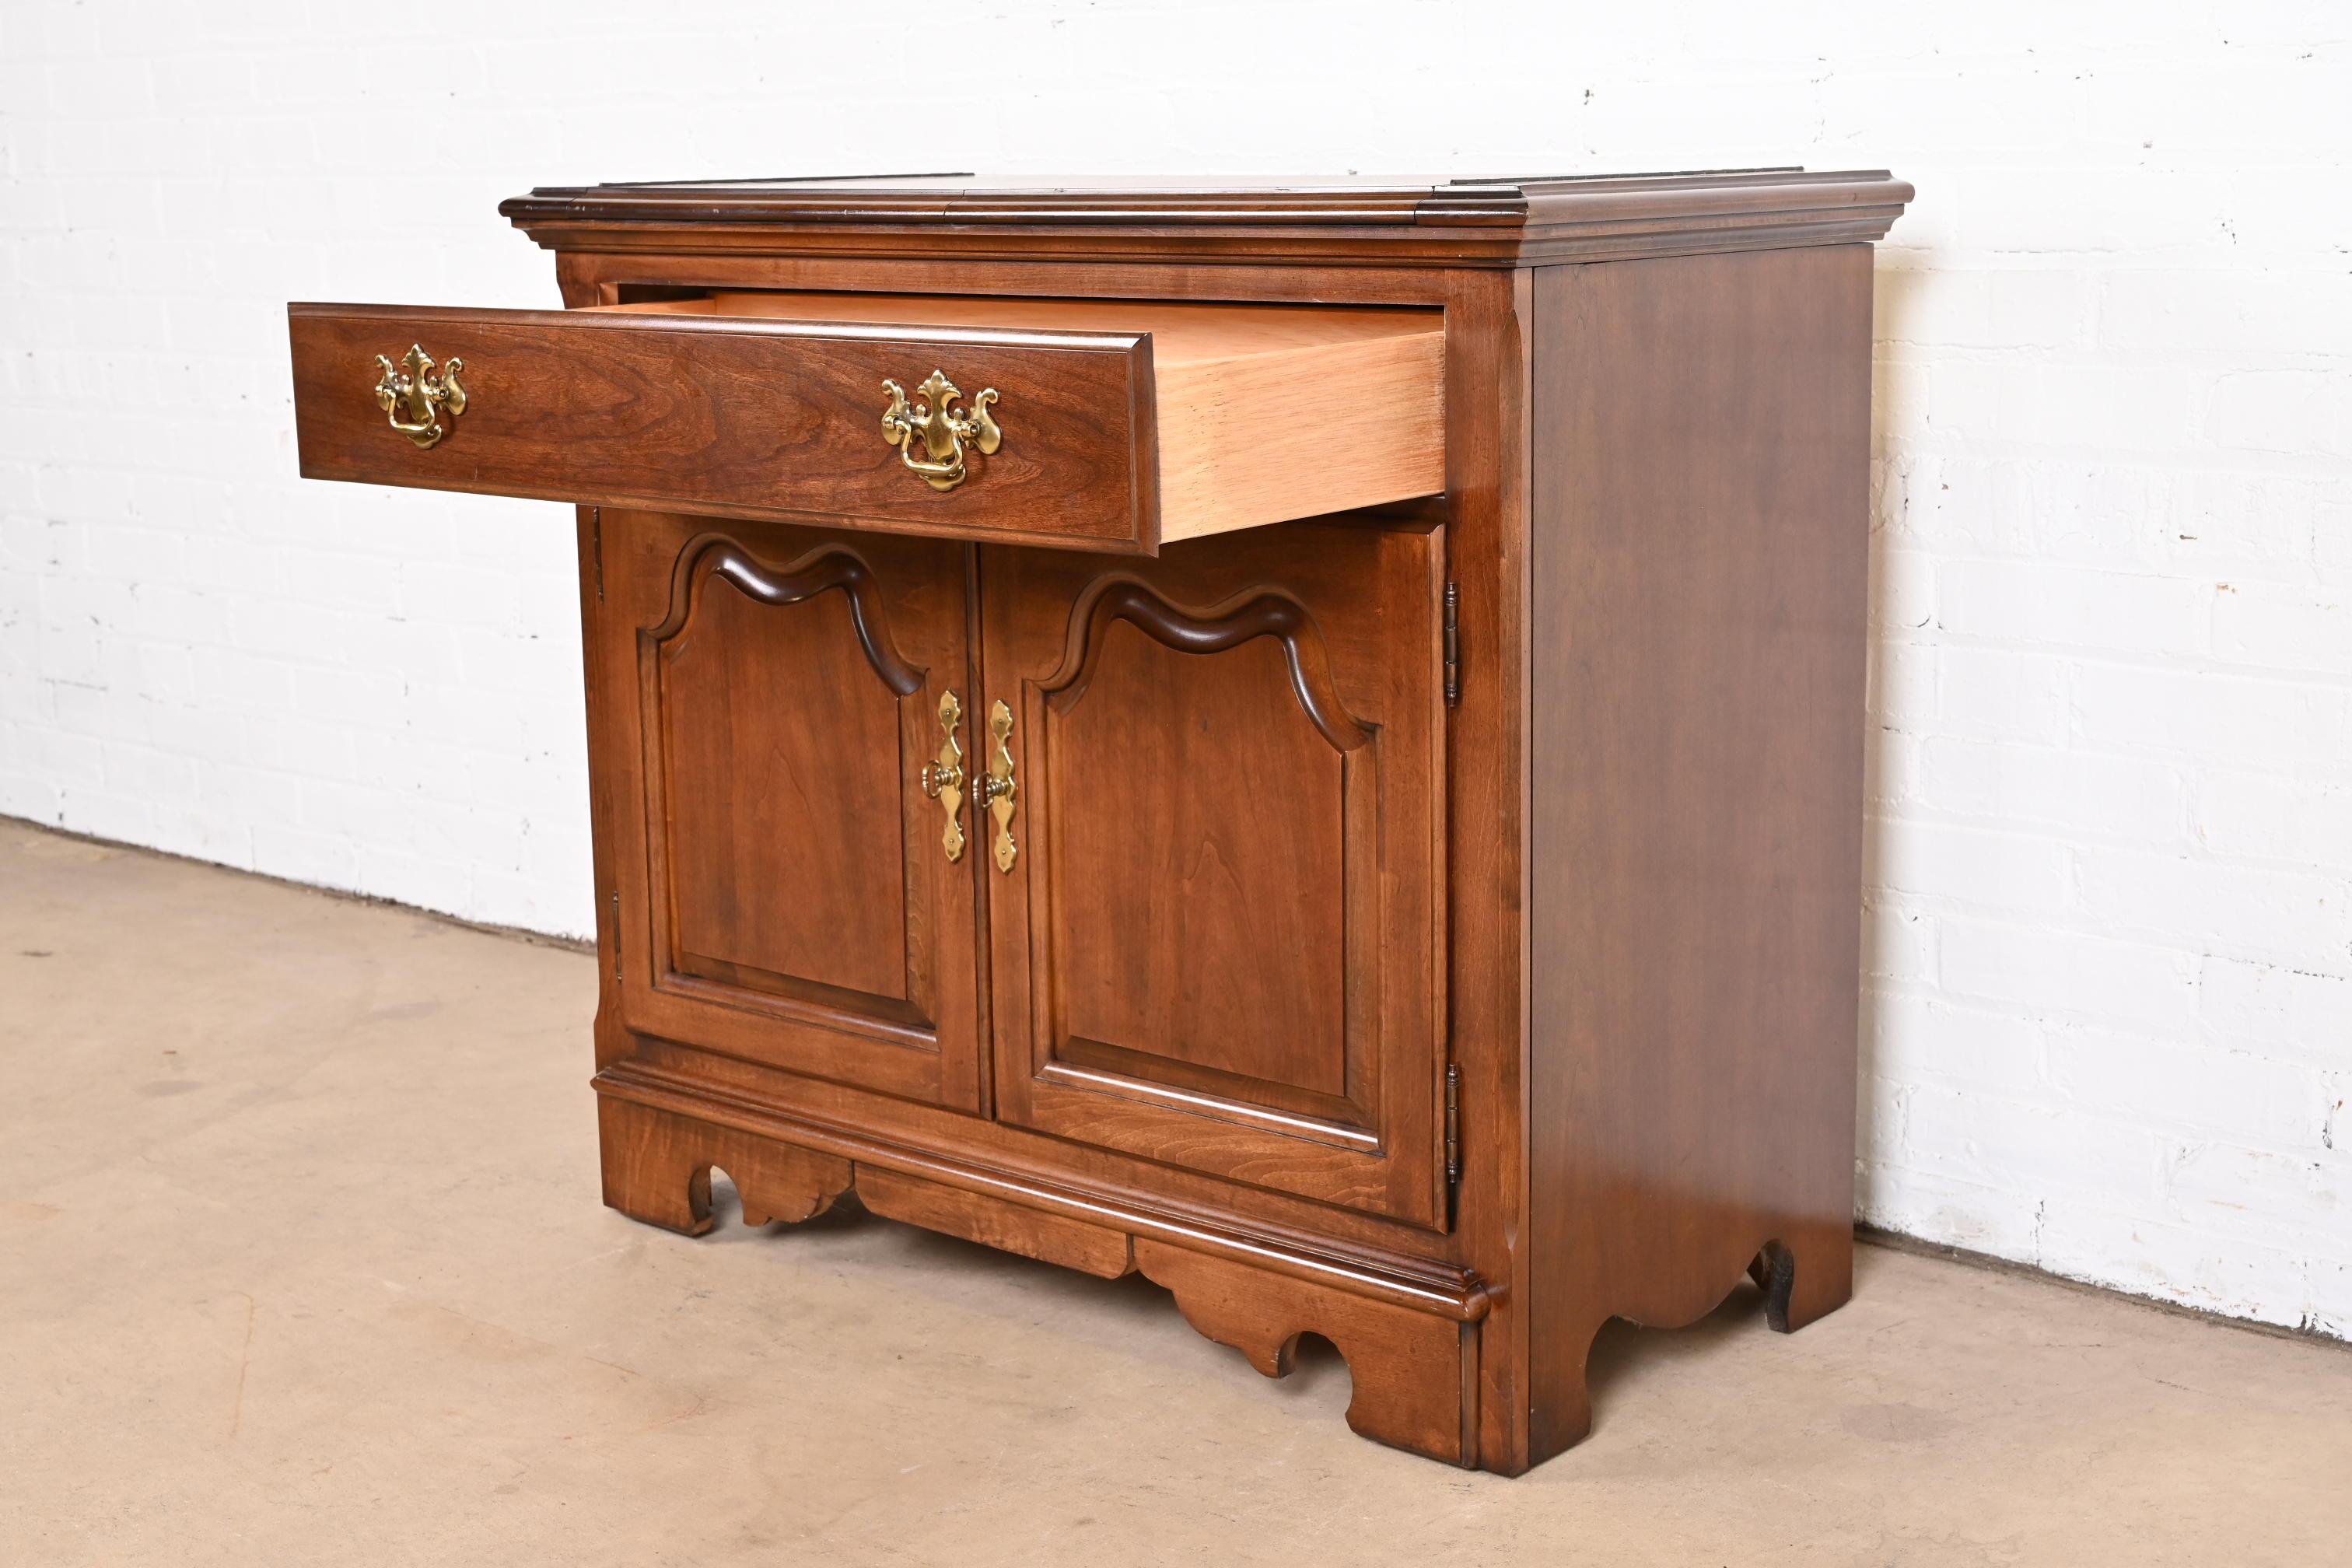 Thomasville Georgian Solid Cherry Wood Flip Top Server or Bar Cabinet For Sale 1